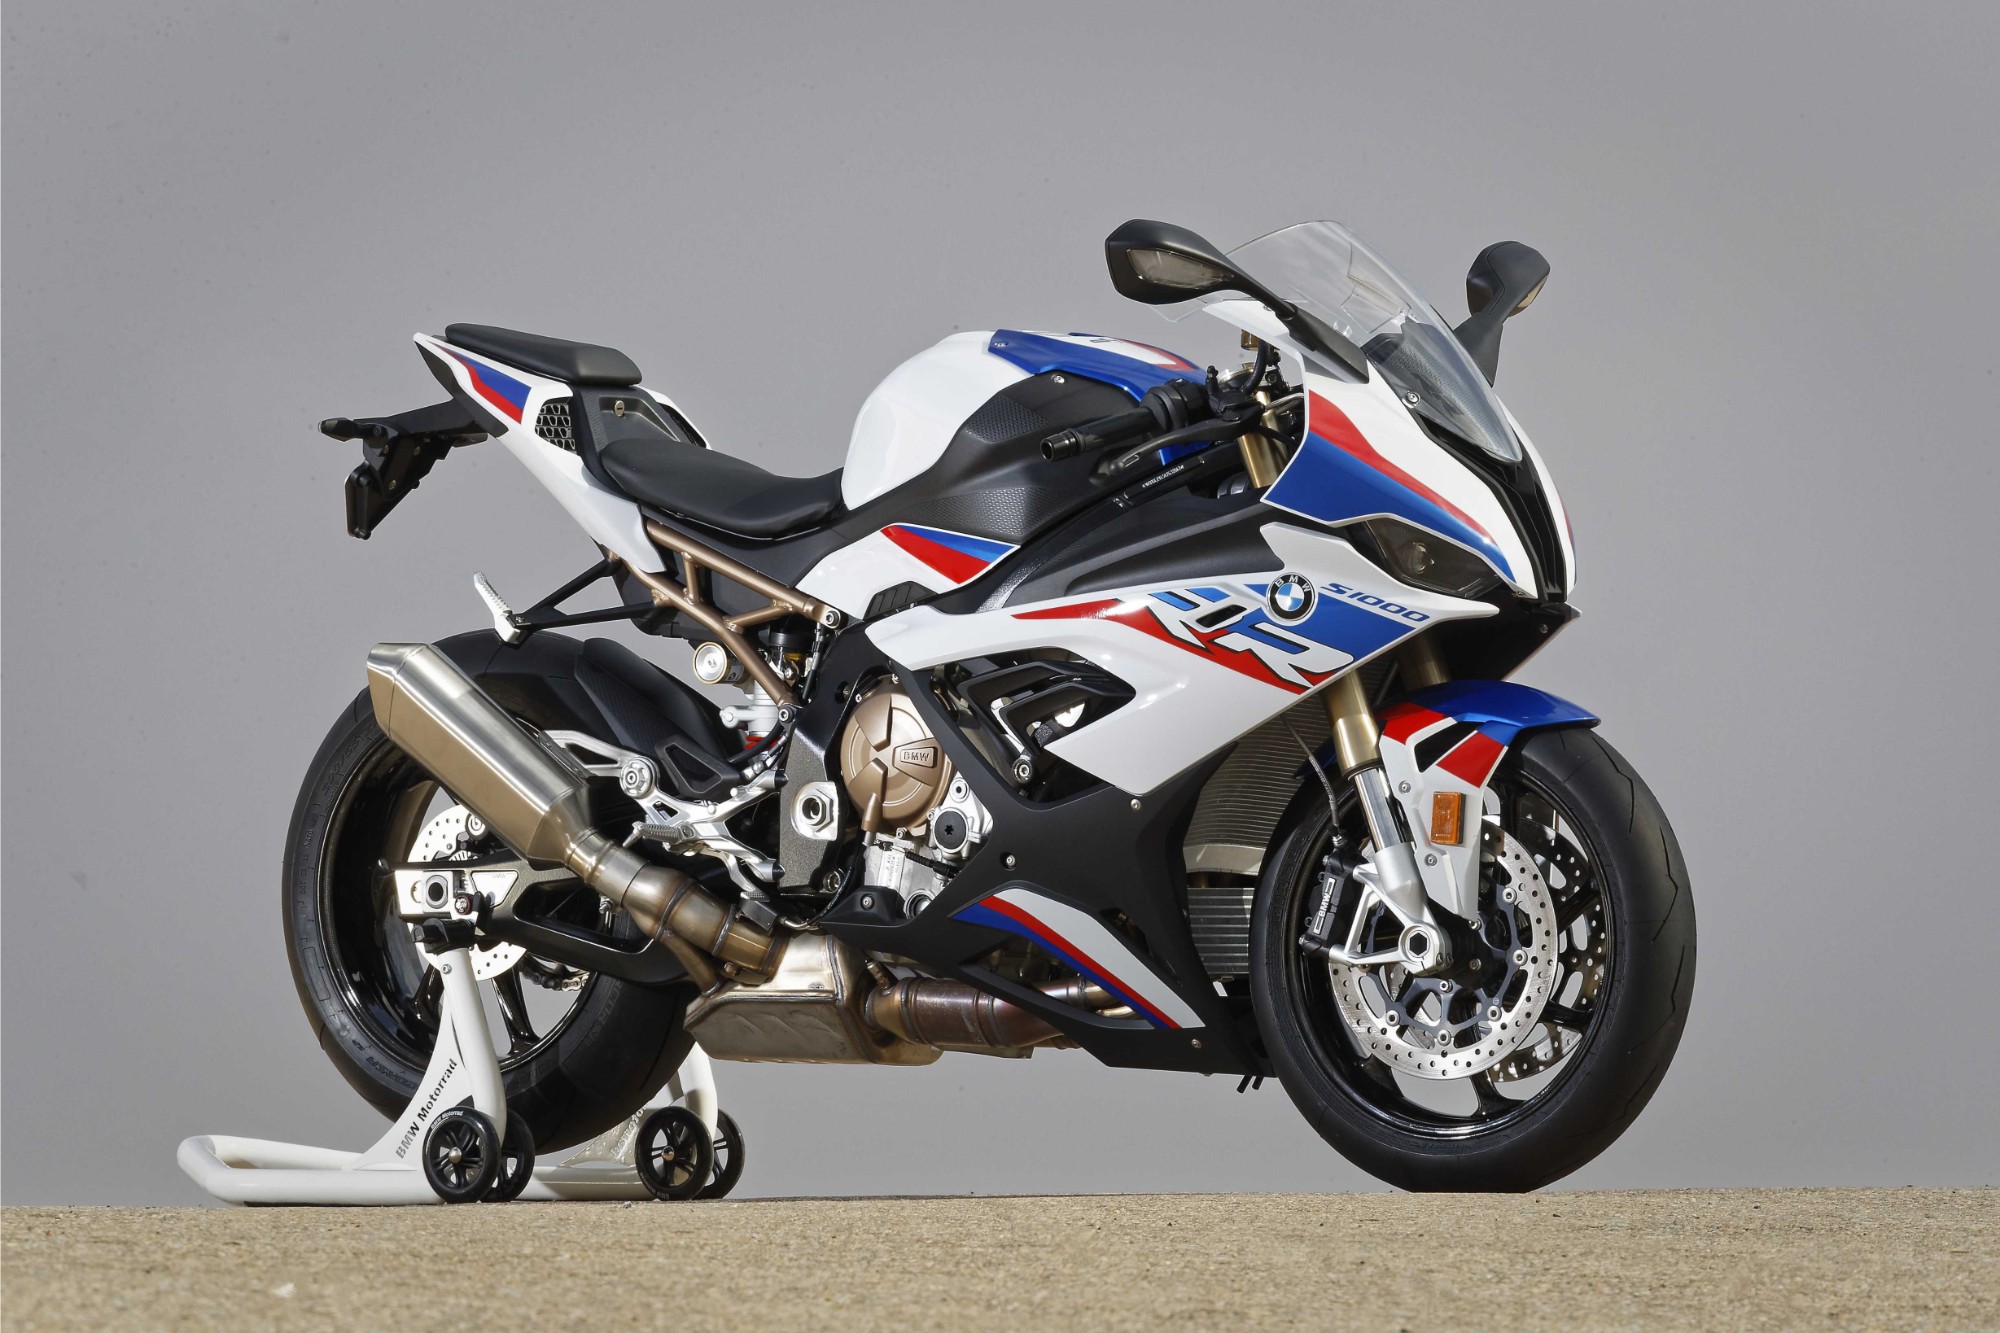 Bmw To Display New S1000rr During International Motorcycle Show